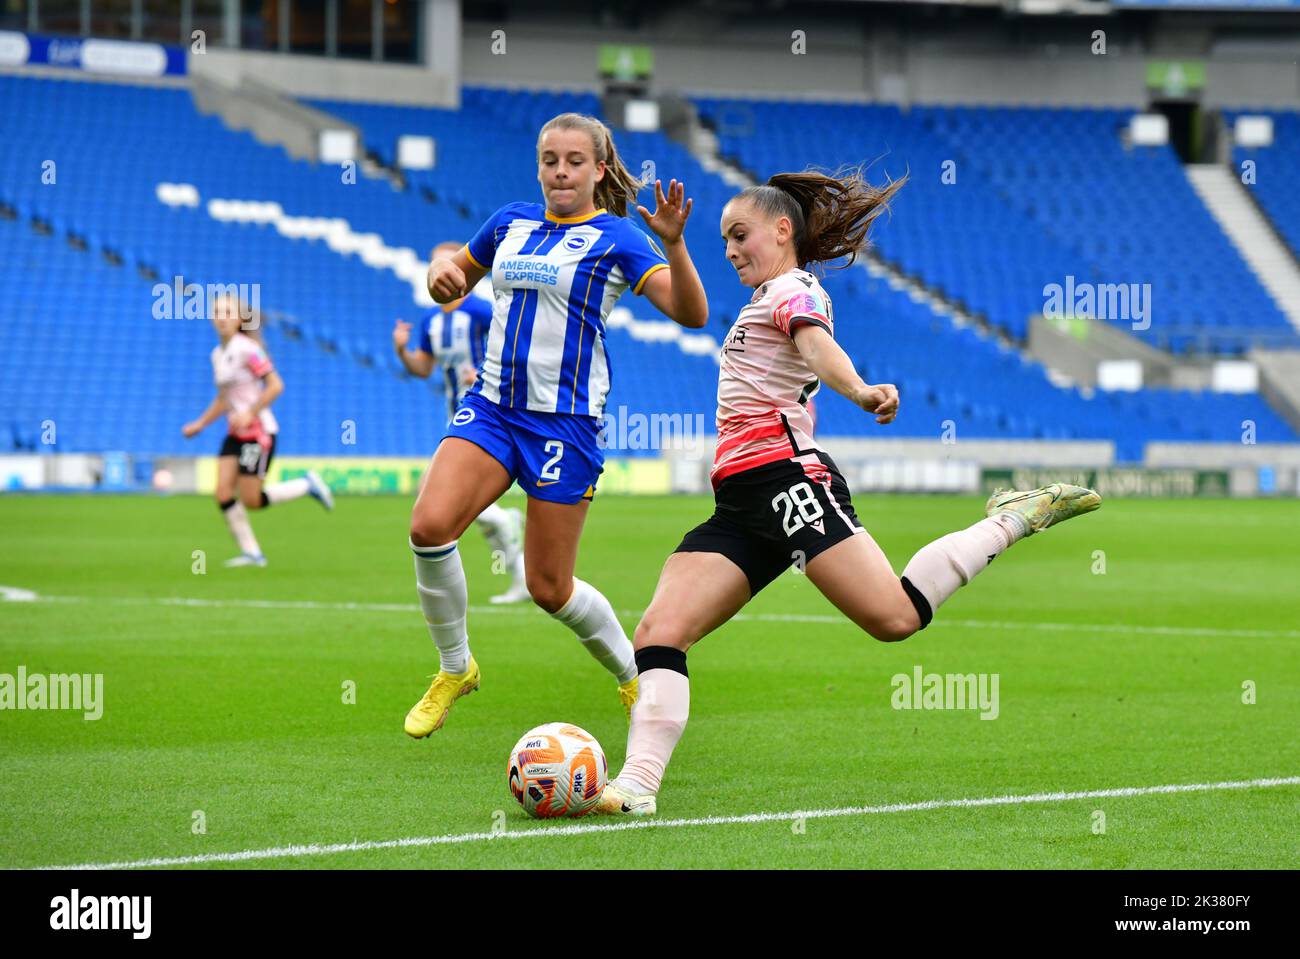 Brighton And Hove, UK. 25th Sep, 2022. Jorja Fox of Brighton and Hove Albion goes in for the block on the attempted cross by Lily Woodham of Reading during the FA Women's Super League match between Brighton & Hove Albion Women and Reading Women at American Express Community Stadium on September 25th 2022 in Brighton and Hove, United Kingdom. (Photo by Jeff Mood/phcimages.com) Credit: PHC Images/Alamy Live News Stock Photo